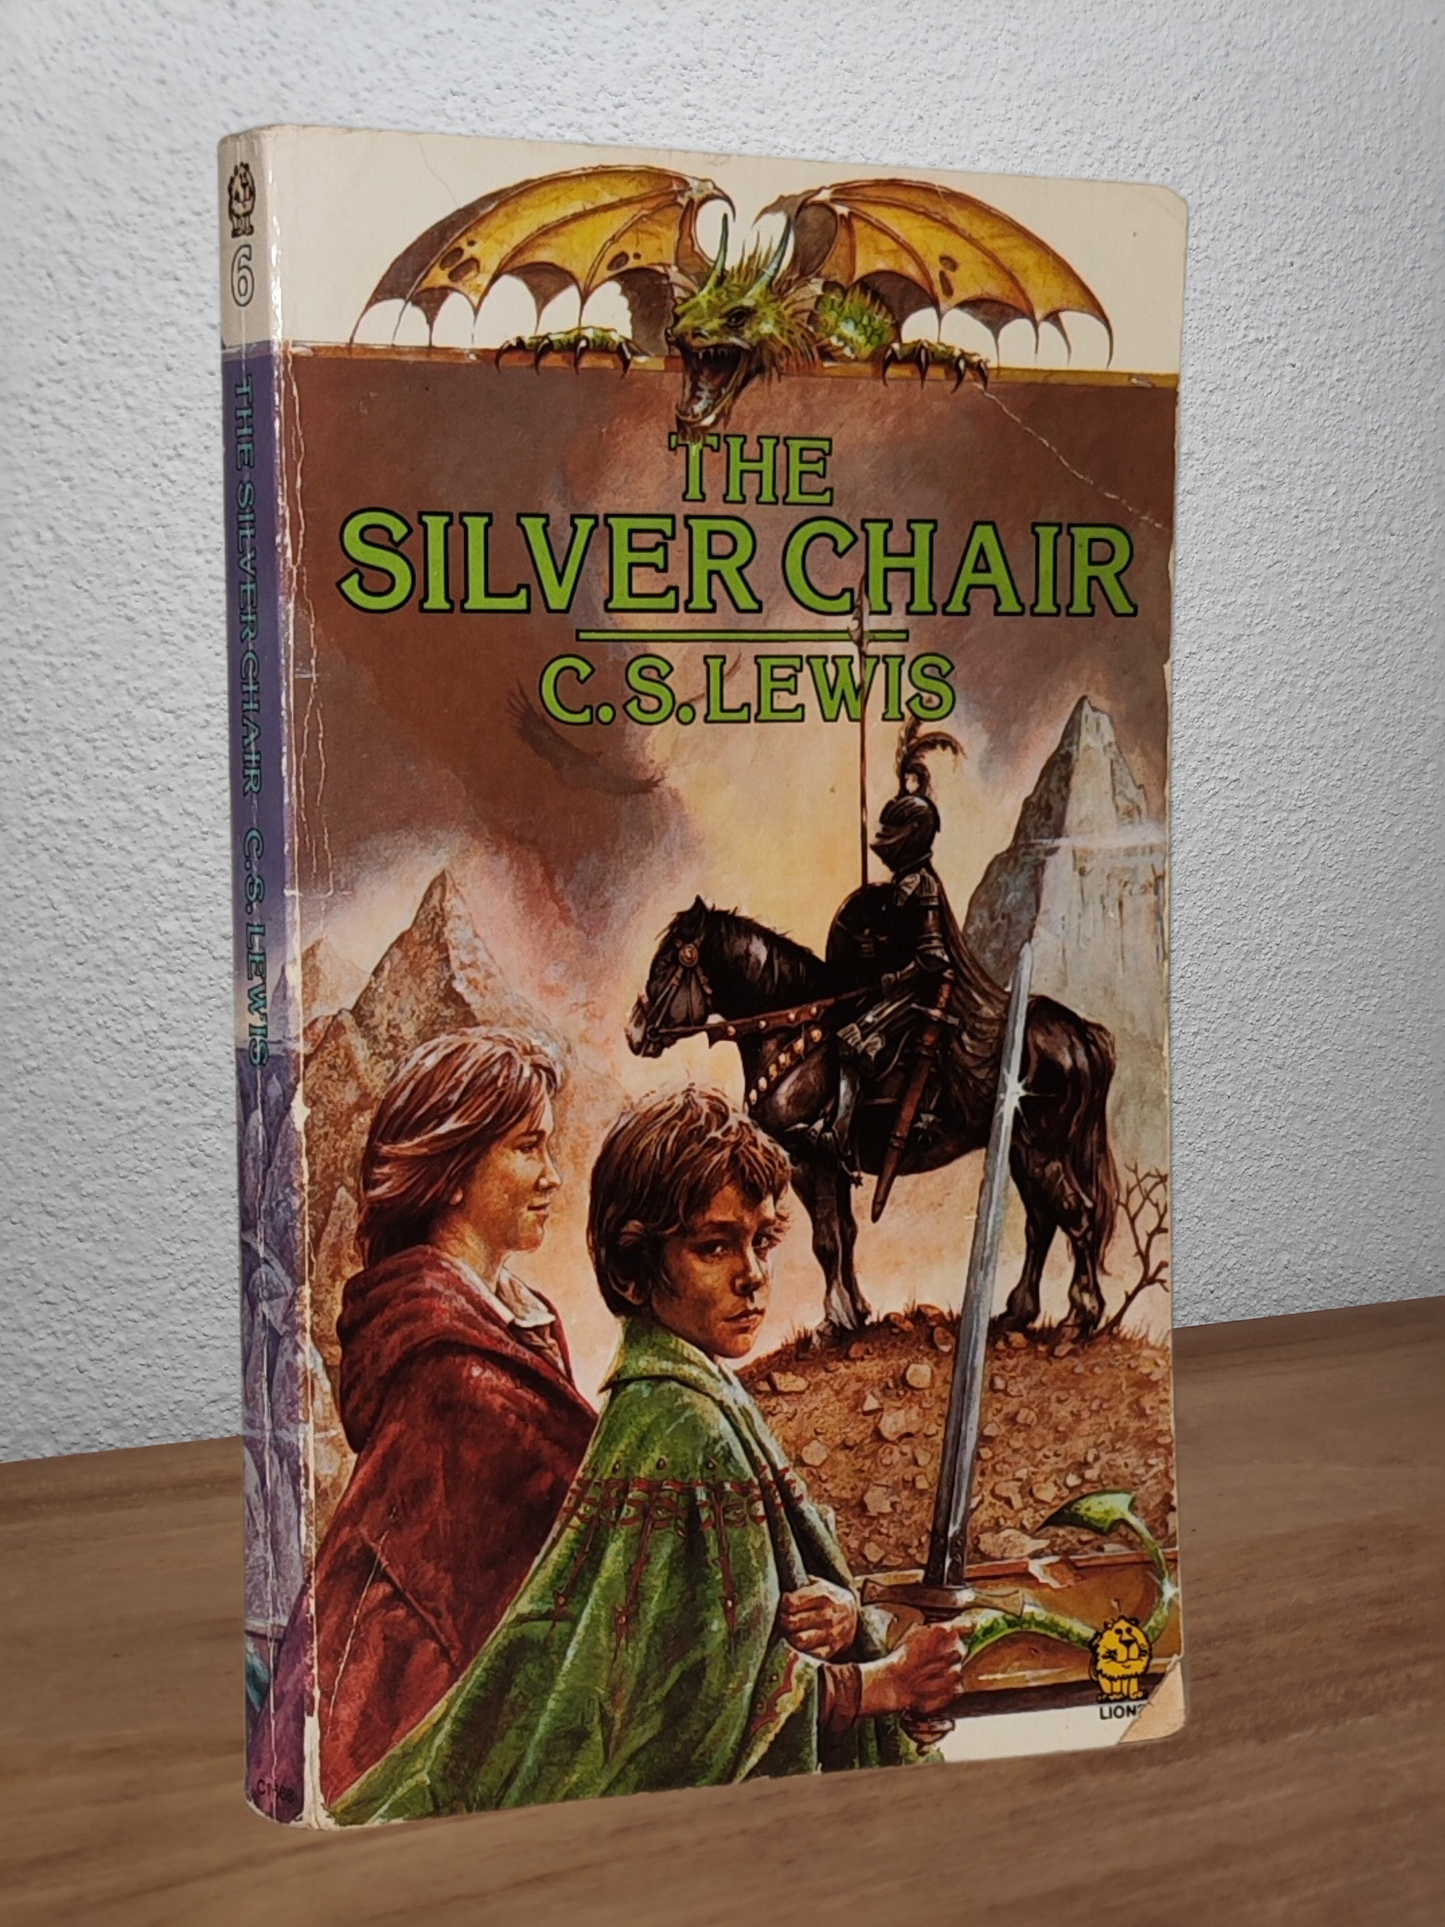 C. S. Lewis - The Silver Chair (Chronicles of Narnia #4) - Second-hand english book to deliver in Zurich & Switzerland